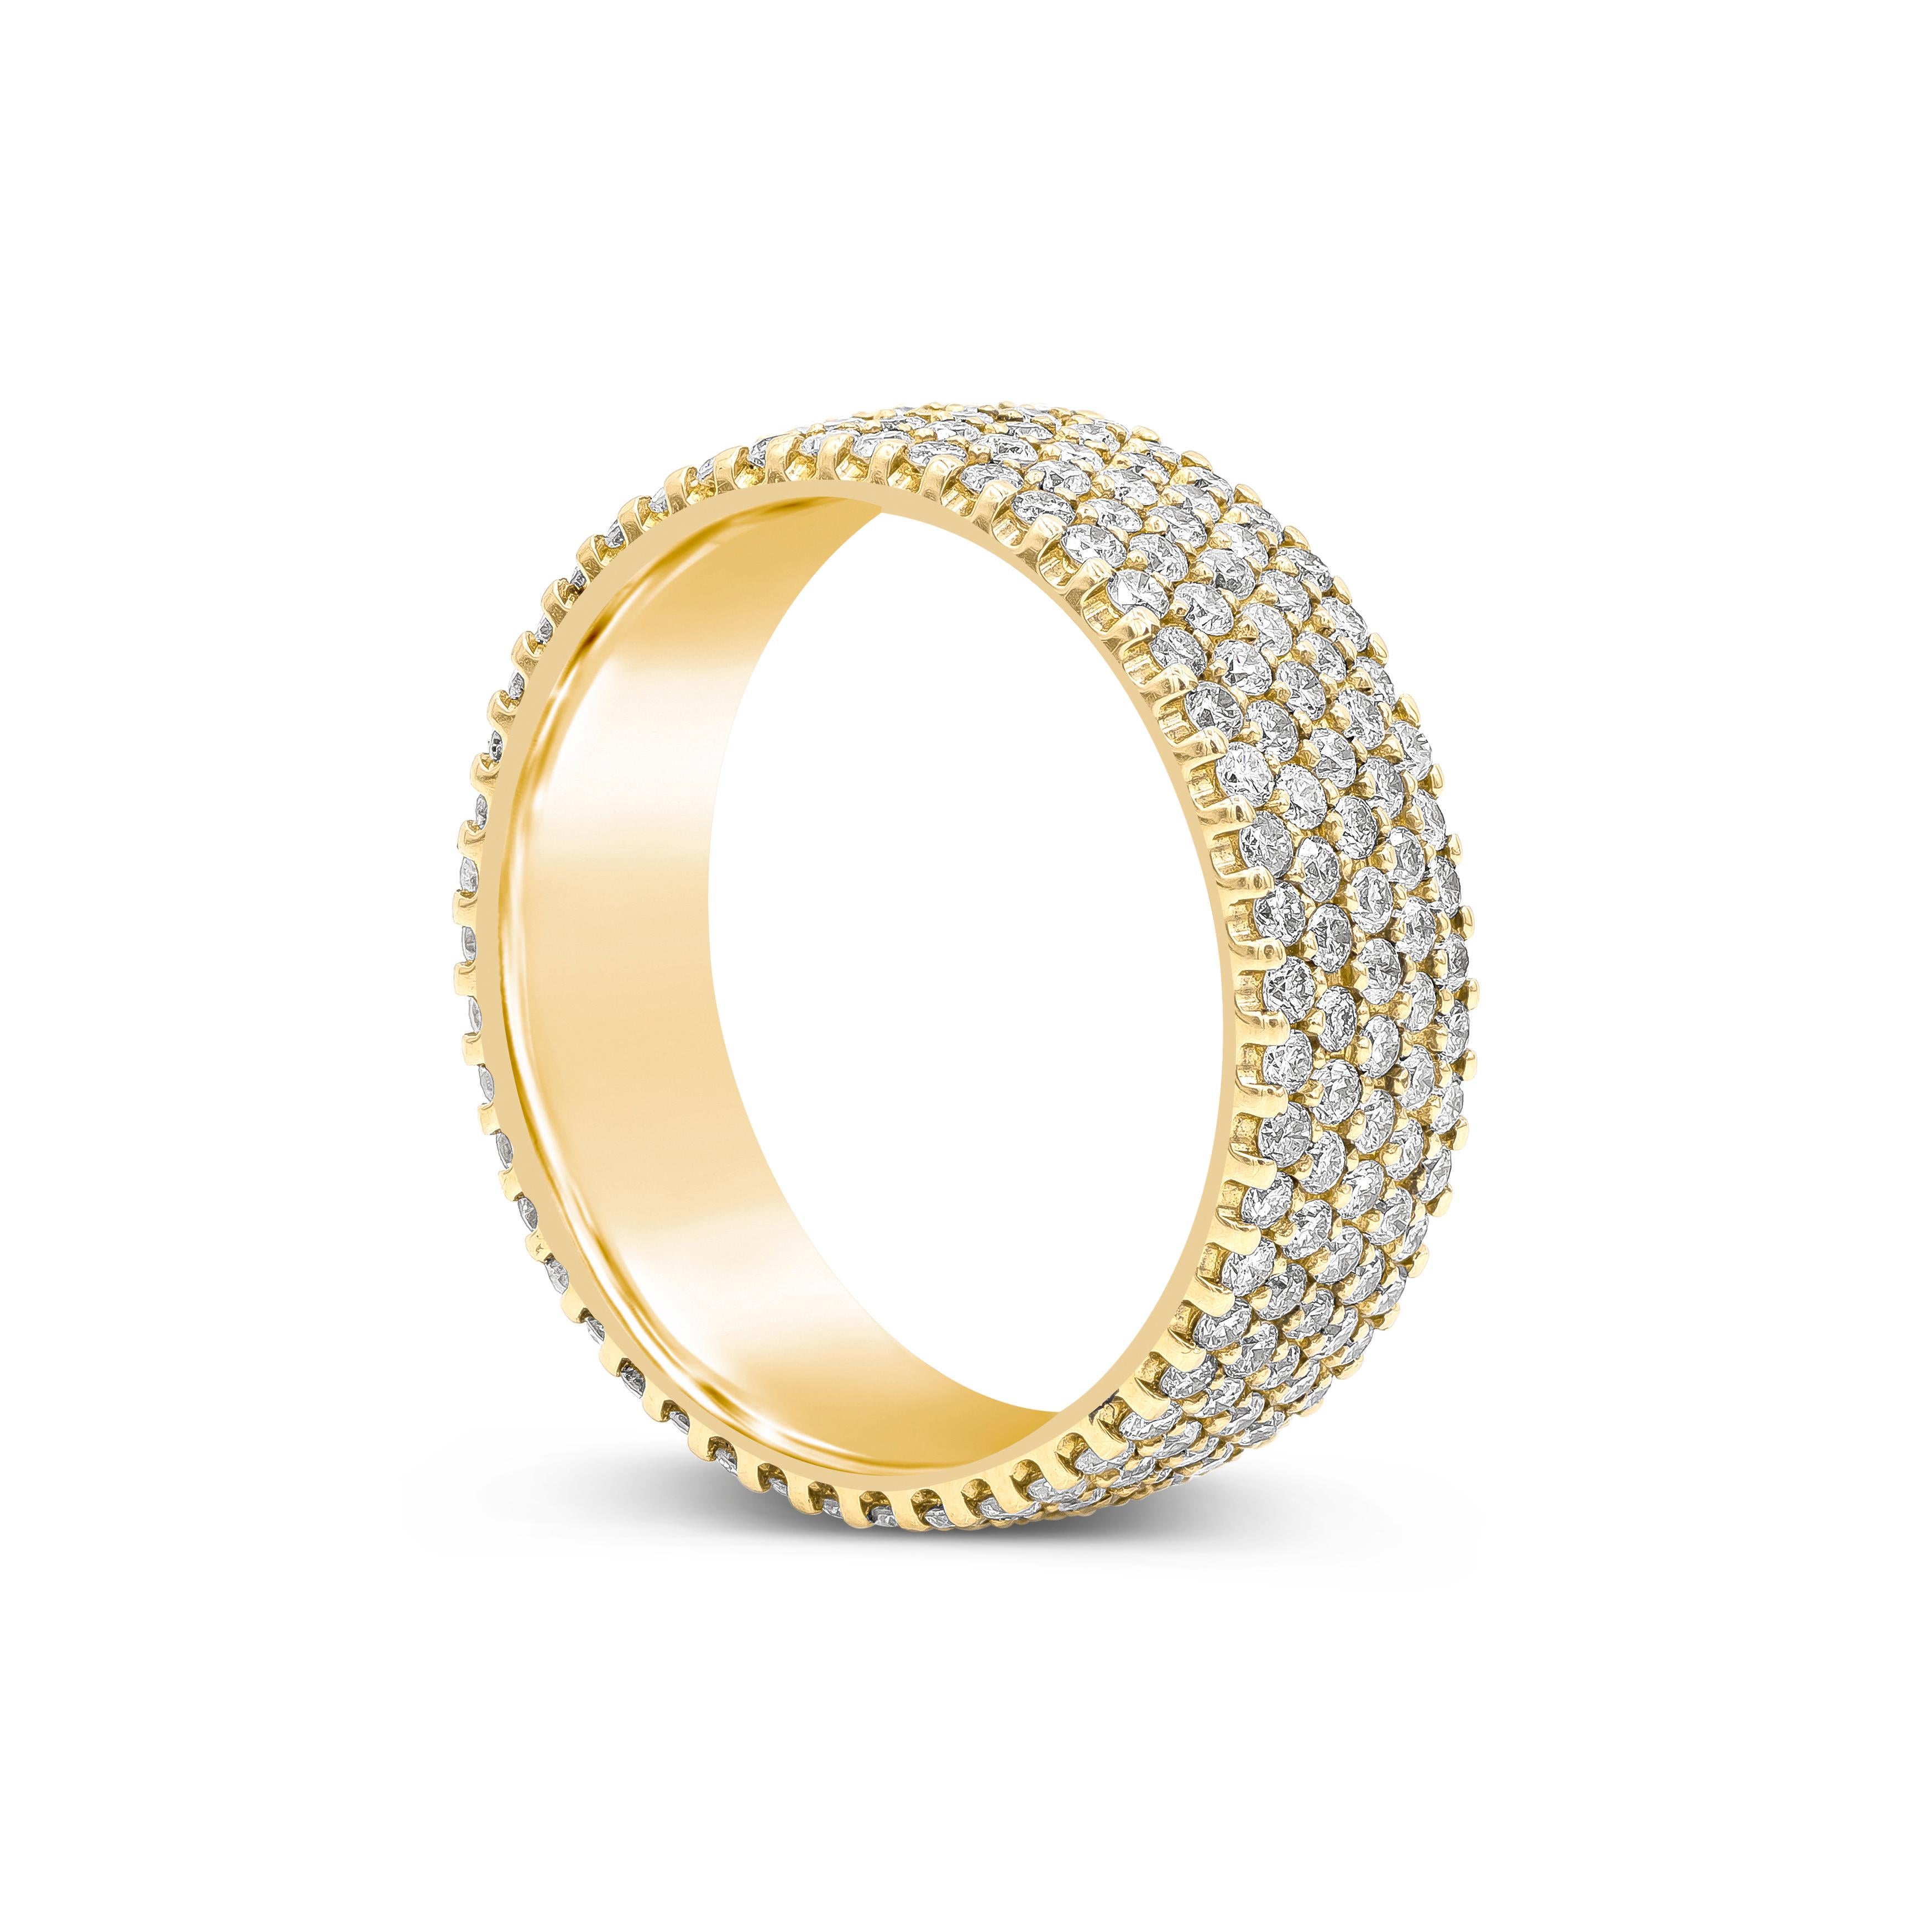 A fashionable eternity ring showcasing five rows of round brilliant diamonds, micro-pave set in 18k rose gold. Total weight of diamonds is 1.75 carats. Can be worn as an everyday ring. Size 6.5 US

Roman Malakov is a custom house, specializing in